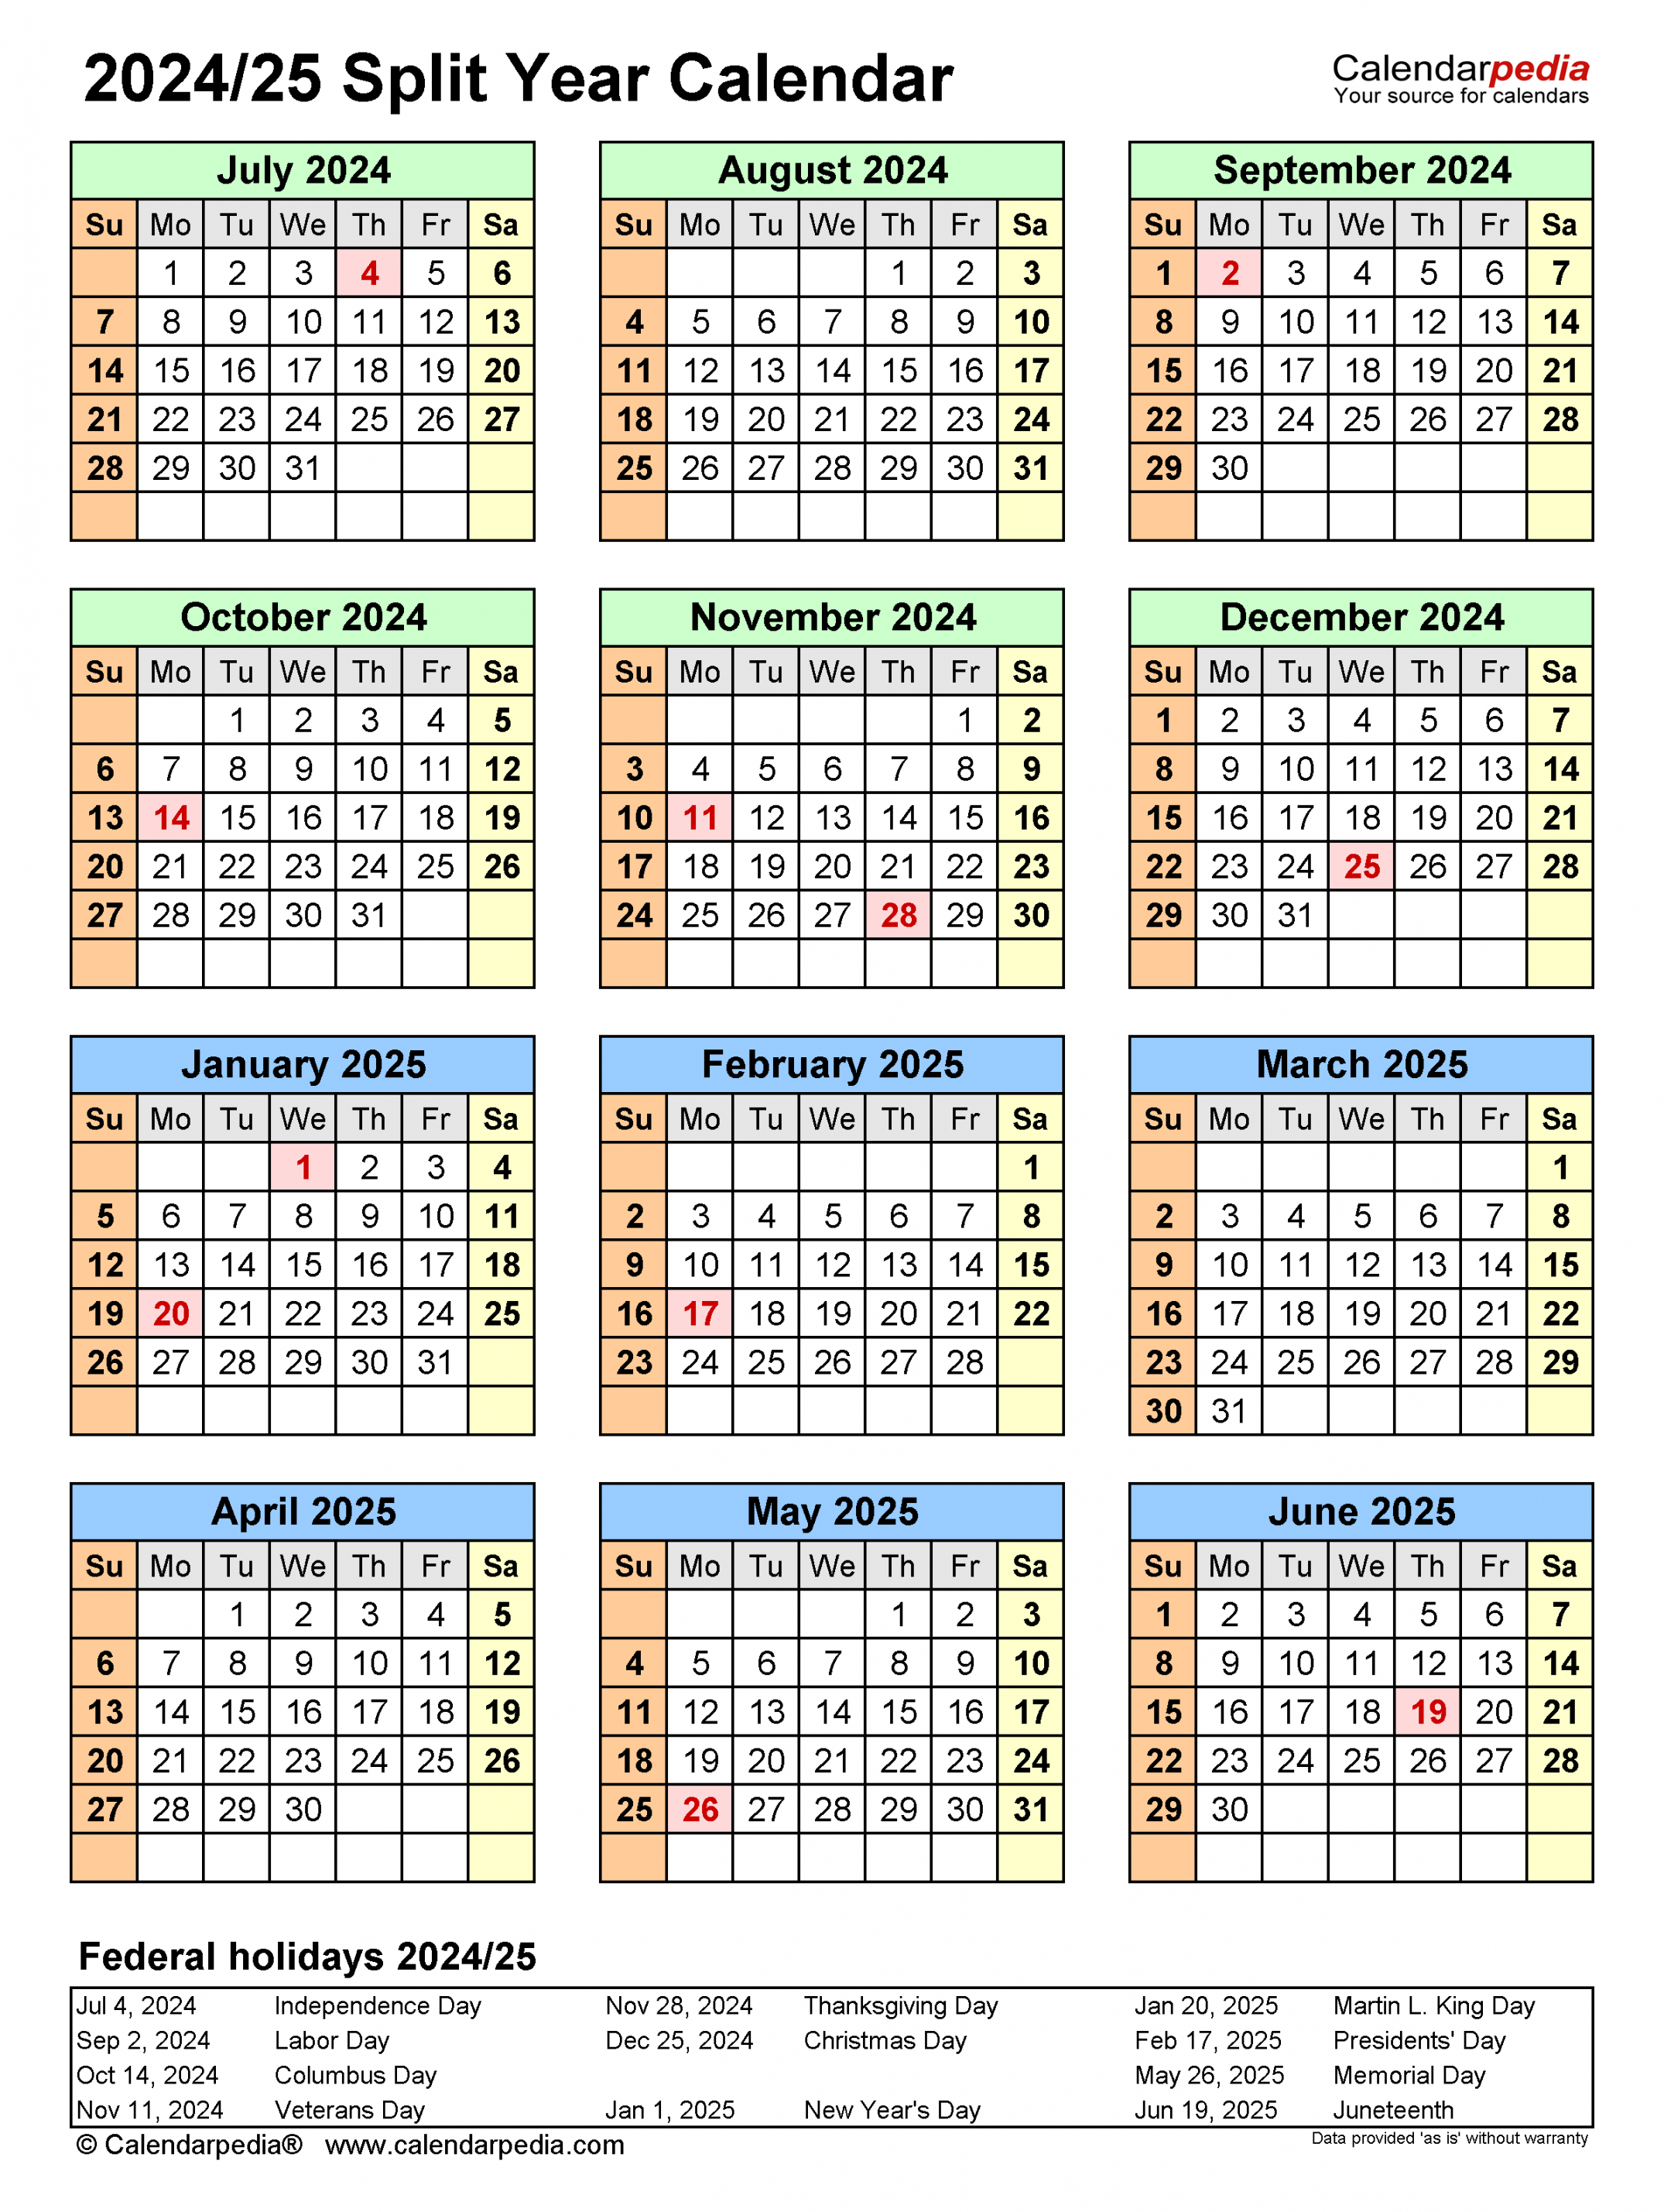 Split Year Calendars / (July to June) - Excel templates